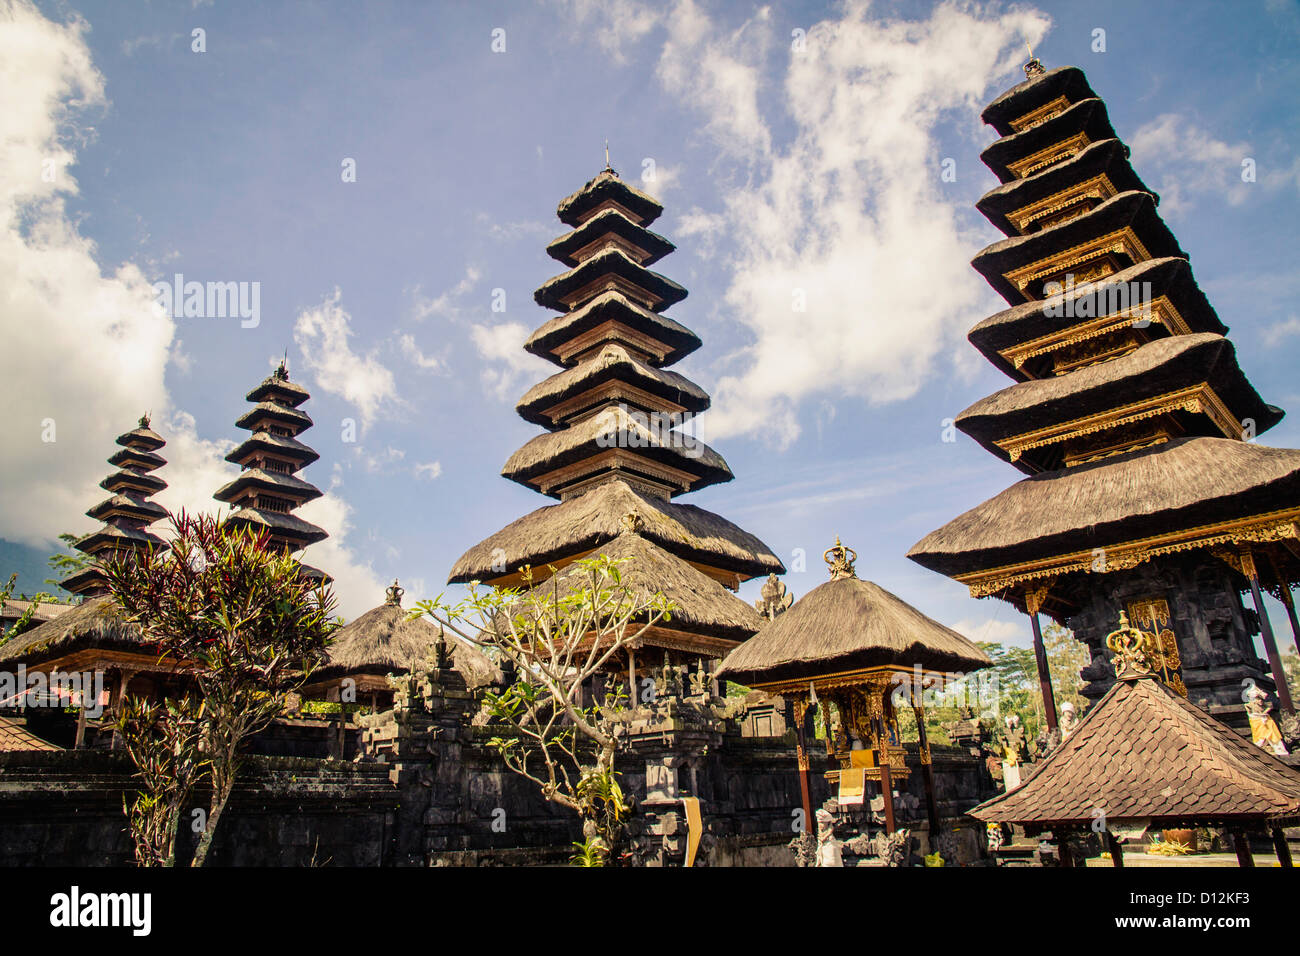 Indonesia, Bali, View of pagoda in Mother Temple of Besakih Stock Photo